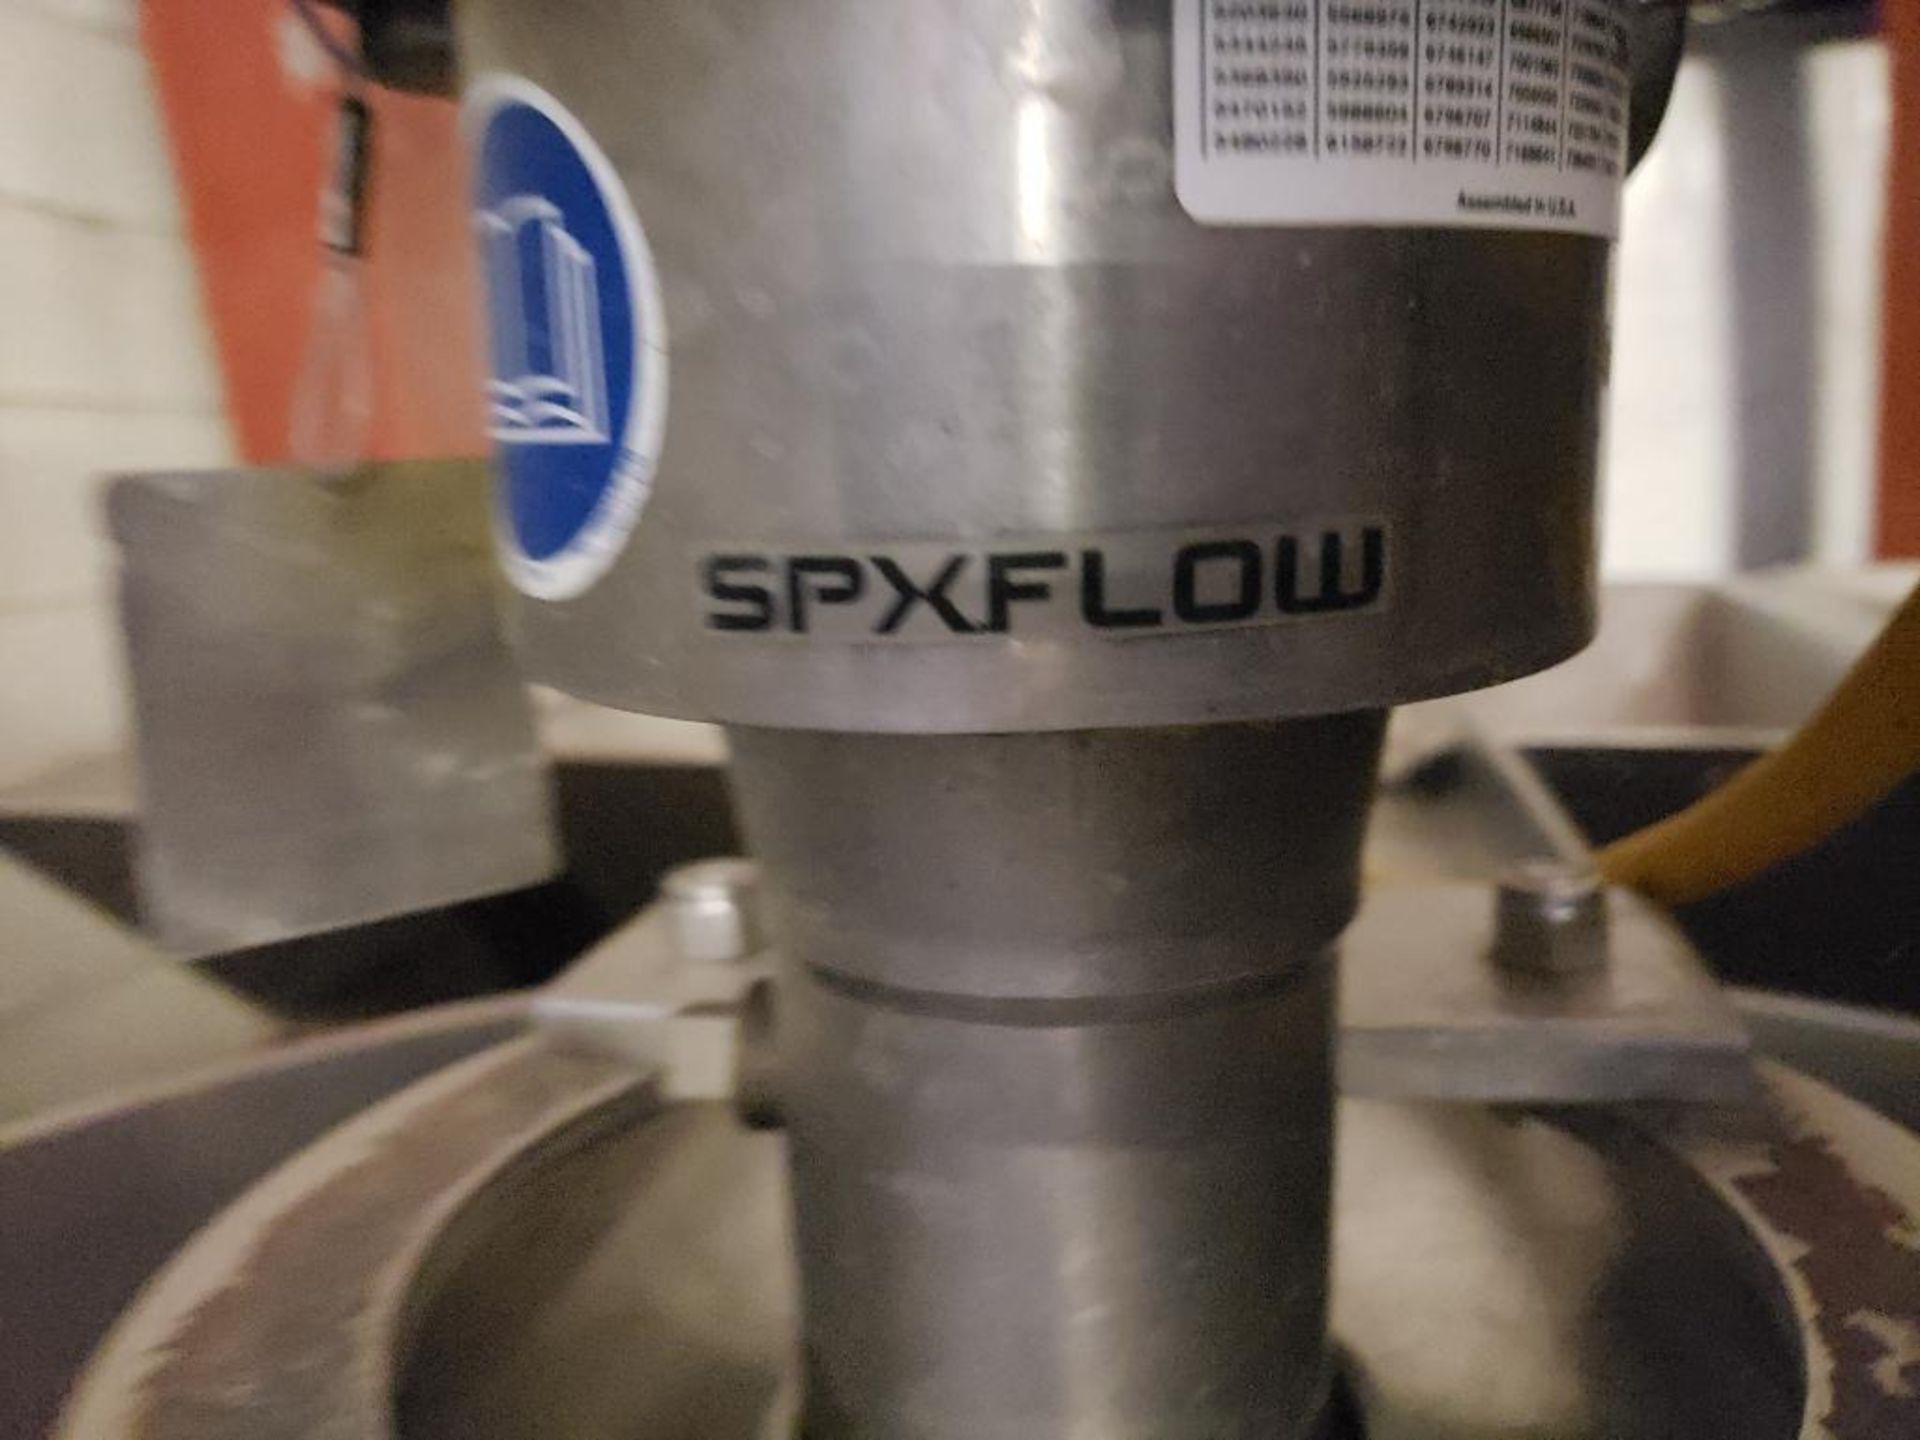 Stainless steel kettle mixer with SPXFlow lightnin mixer. - Image 3 of 11